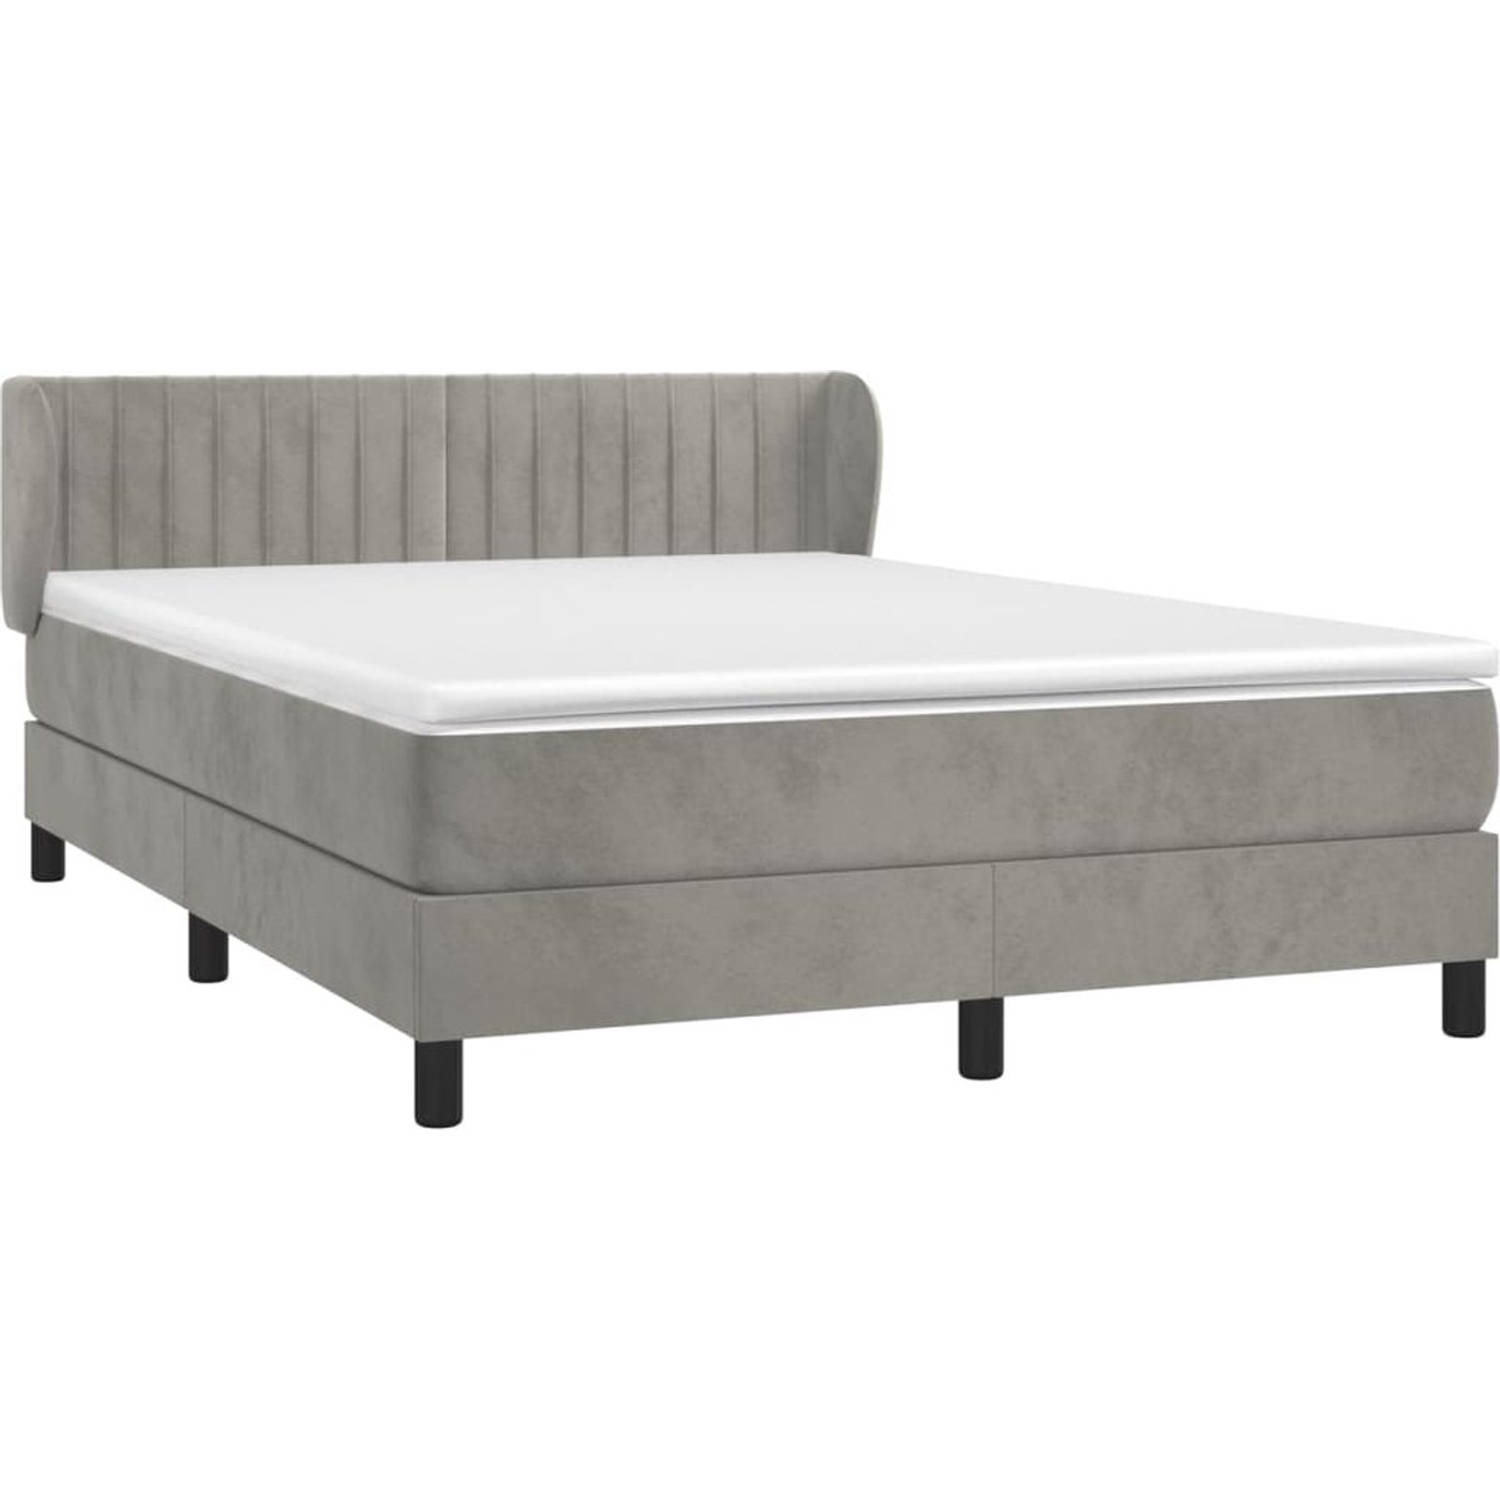 The Living Store Boxspringbed - Bed - 193 x 147 x 78/88 cm - Lichtgrijs Fluweel